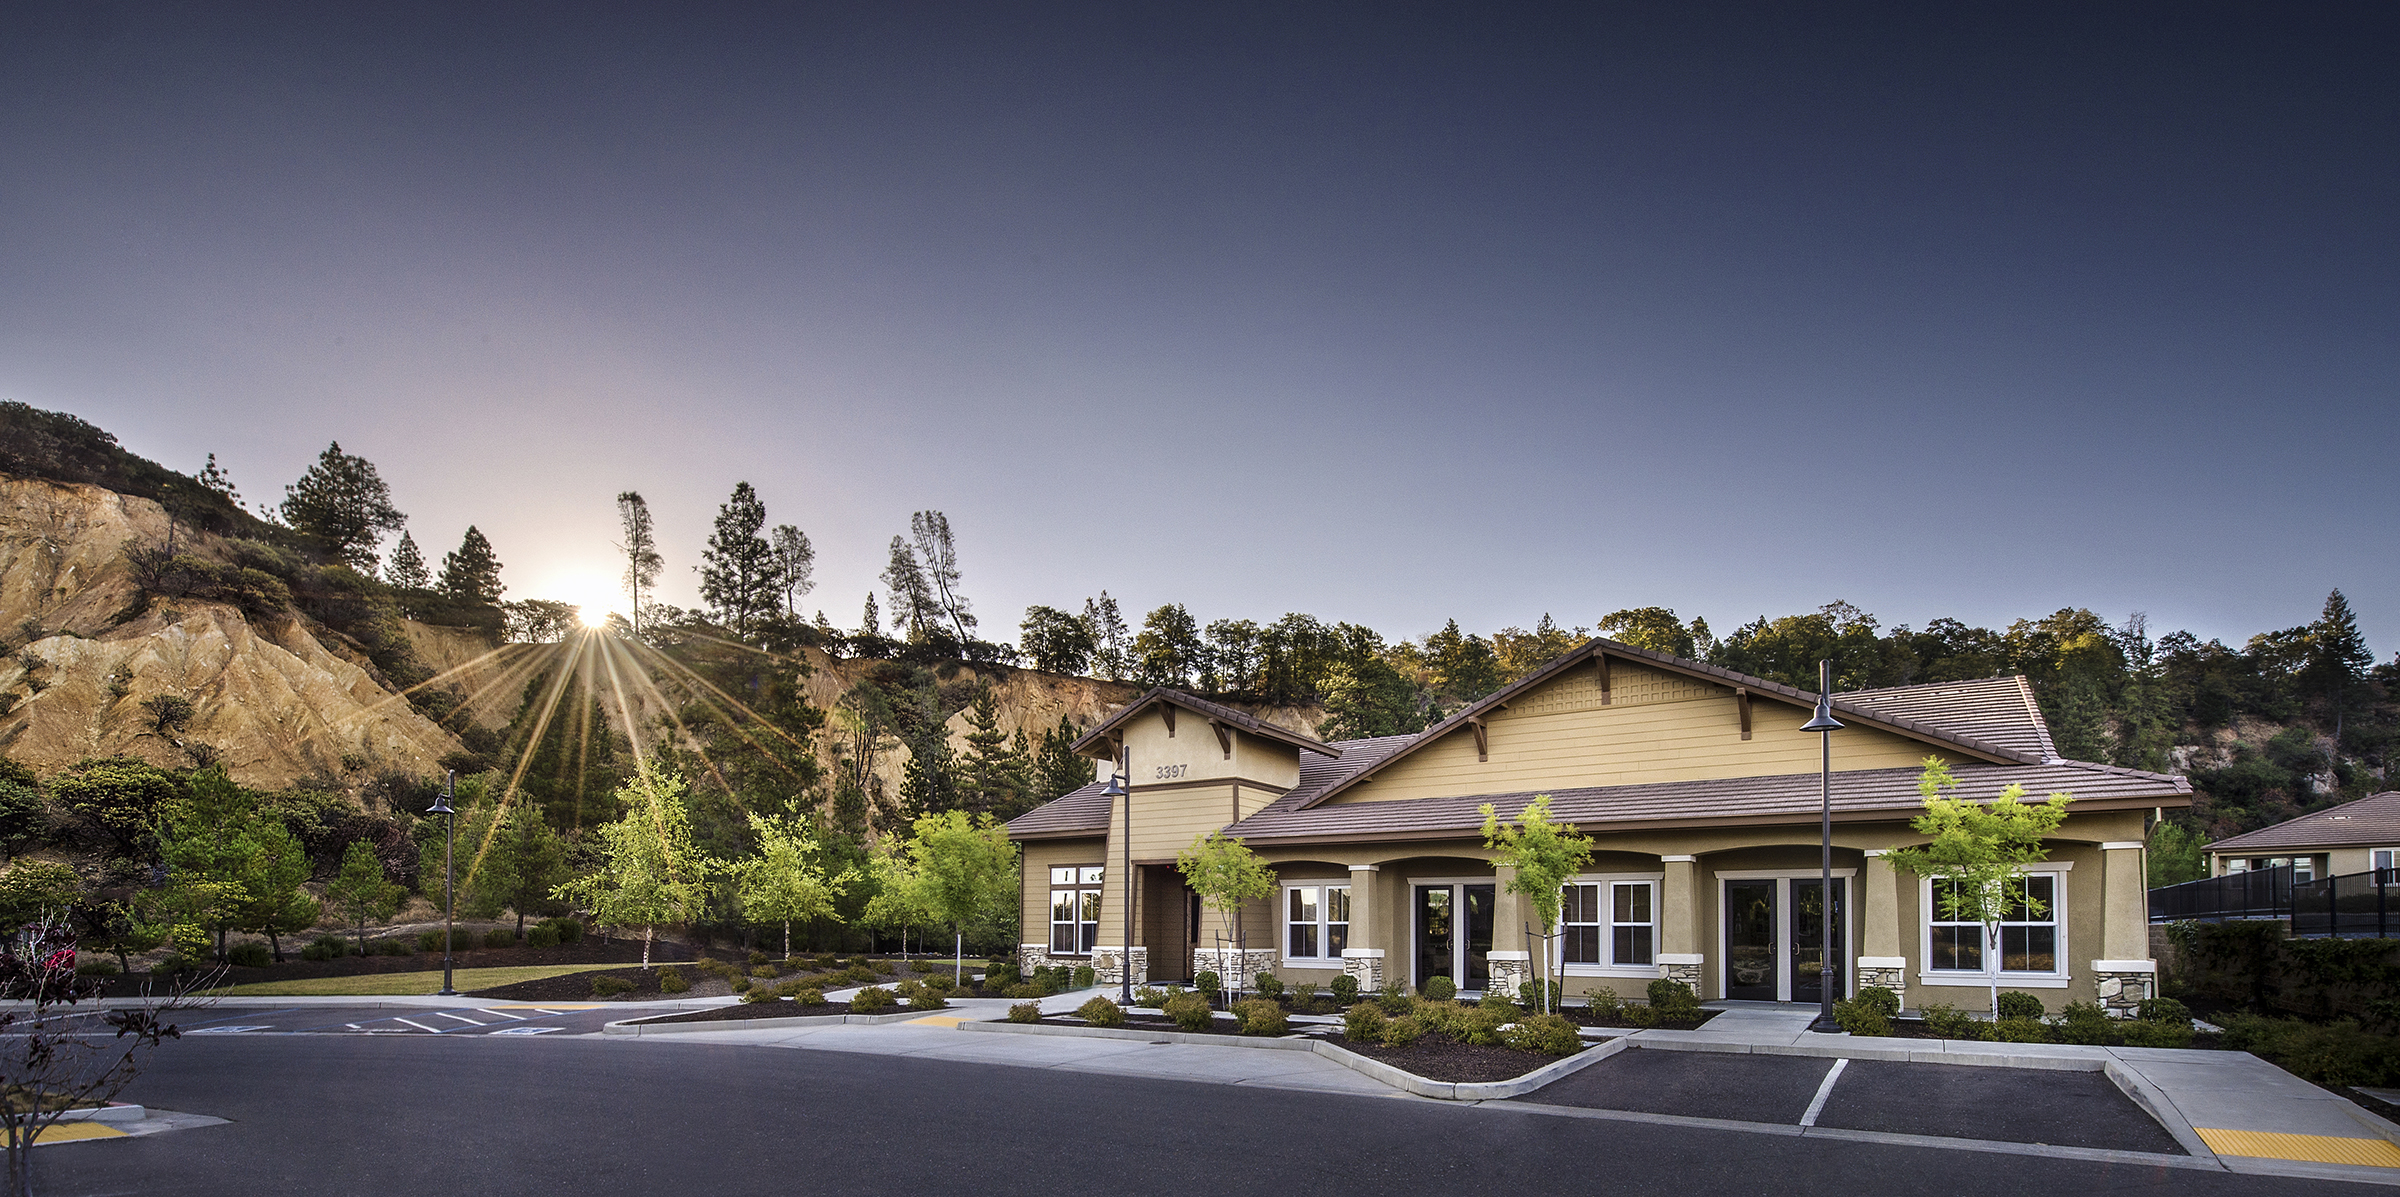 Silverado Village in Placerville offers a Variety of Lifestyle Options for Seniors